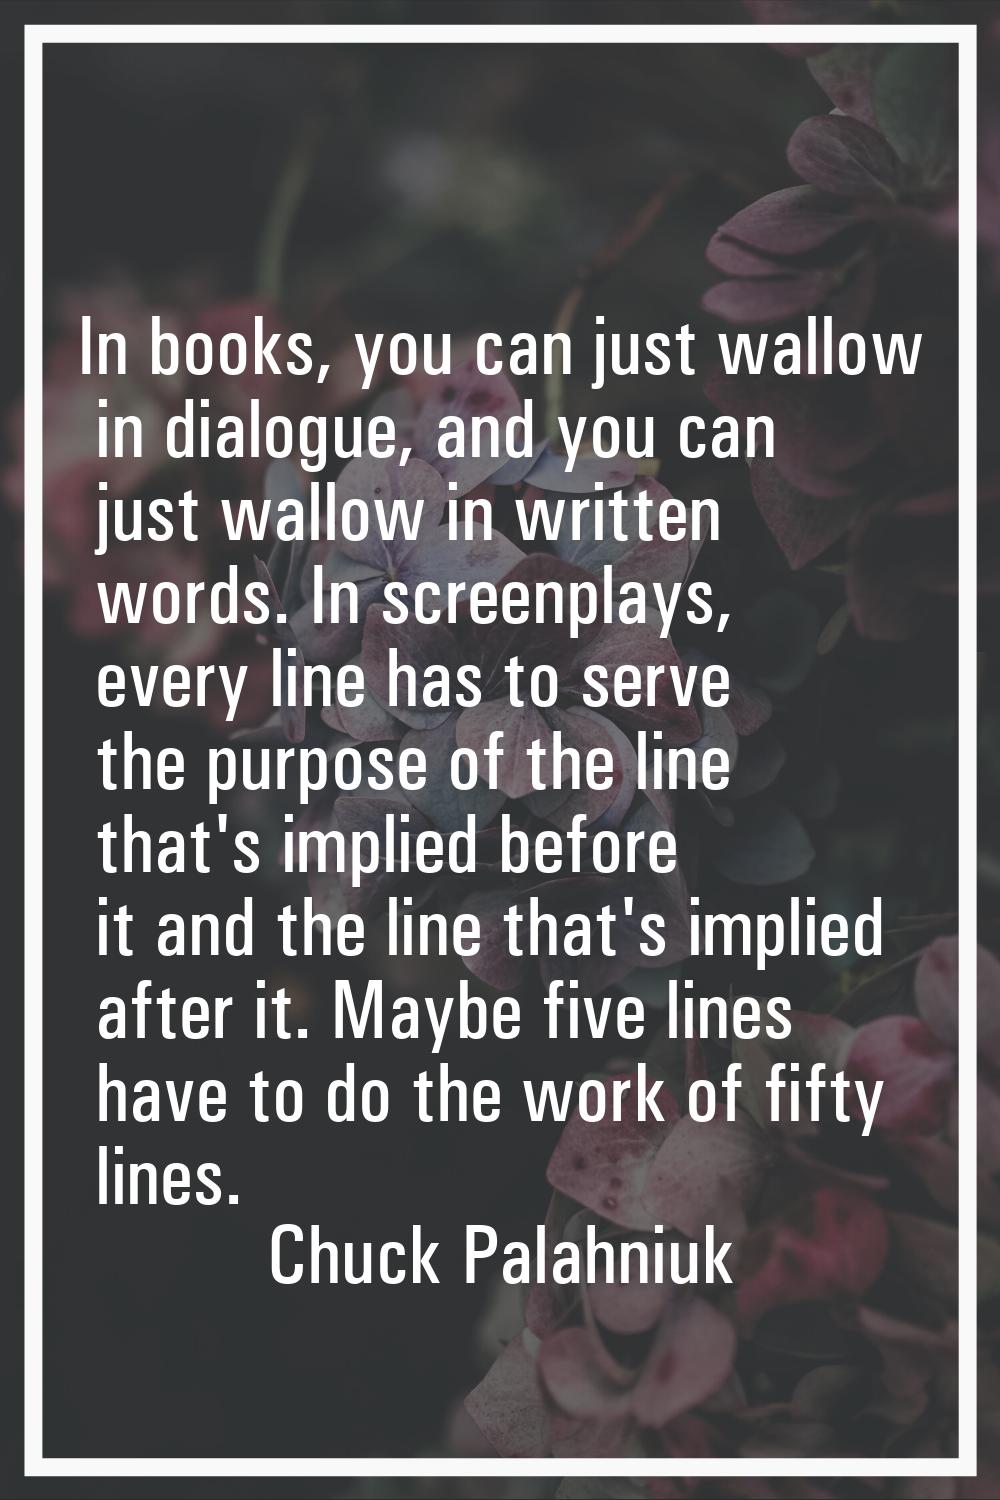 In books, you can just wallow in dialogue, and you can just wallow in written words. In screenplays